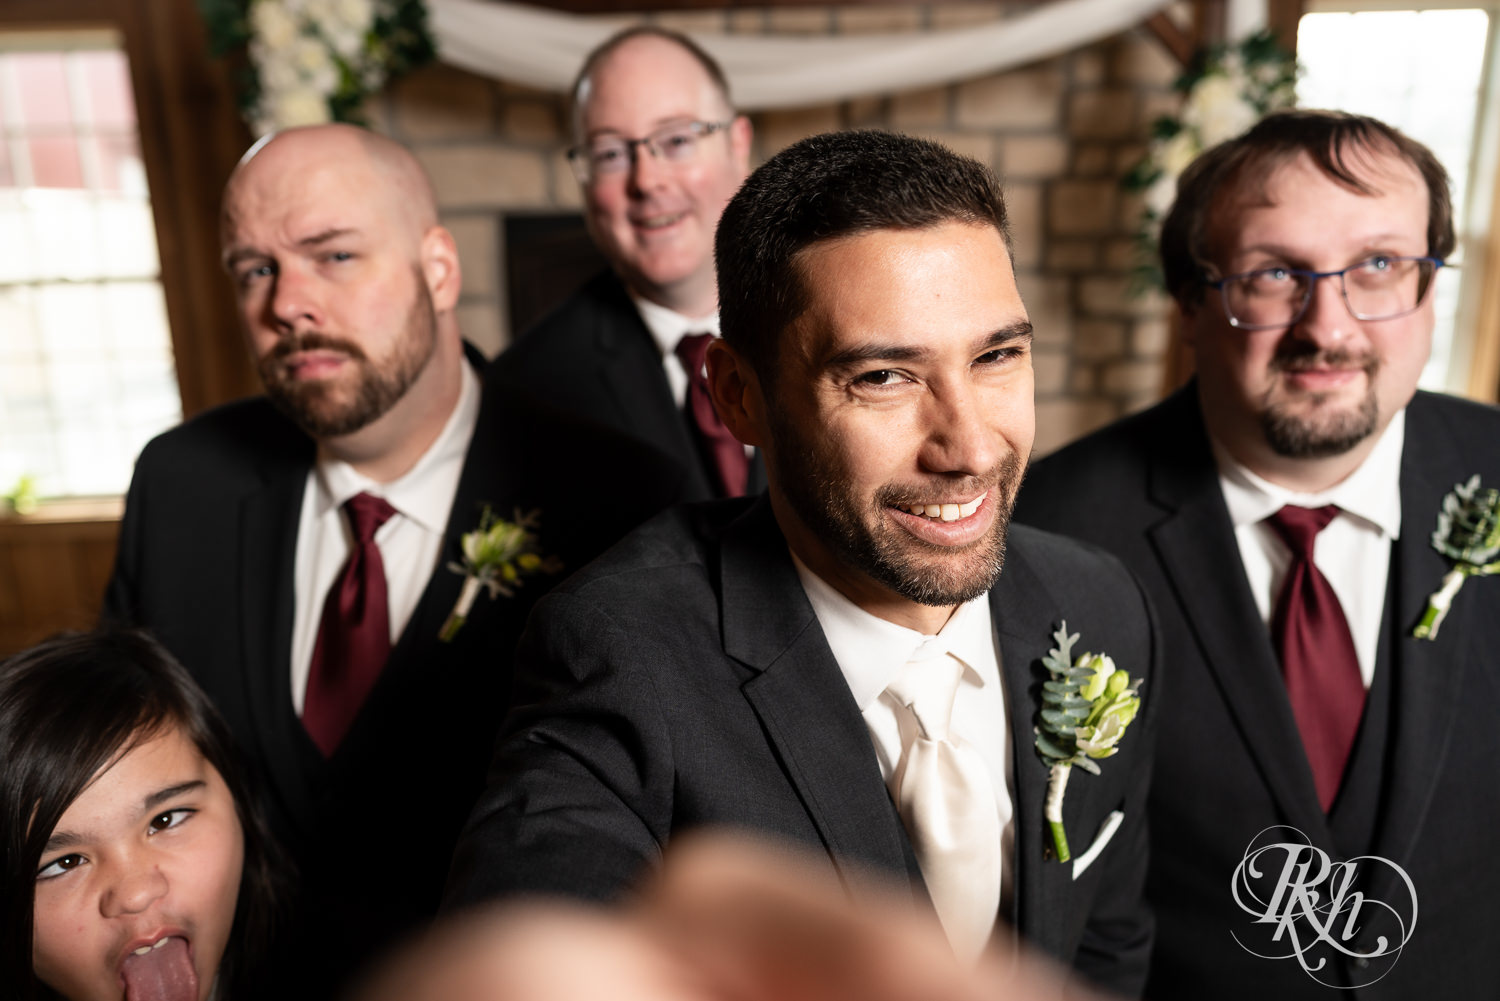 Groom smiles with wedding party at Almquist Farm in Hastings, Minnesota.